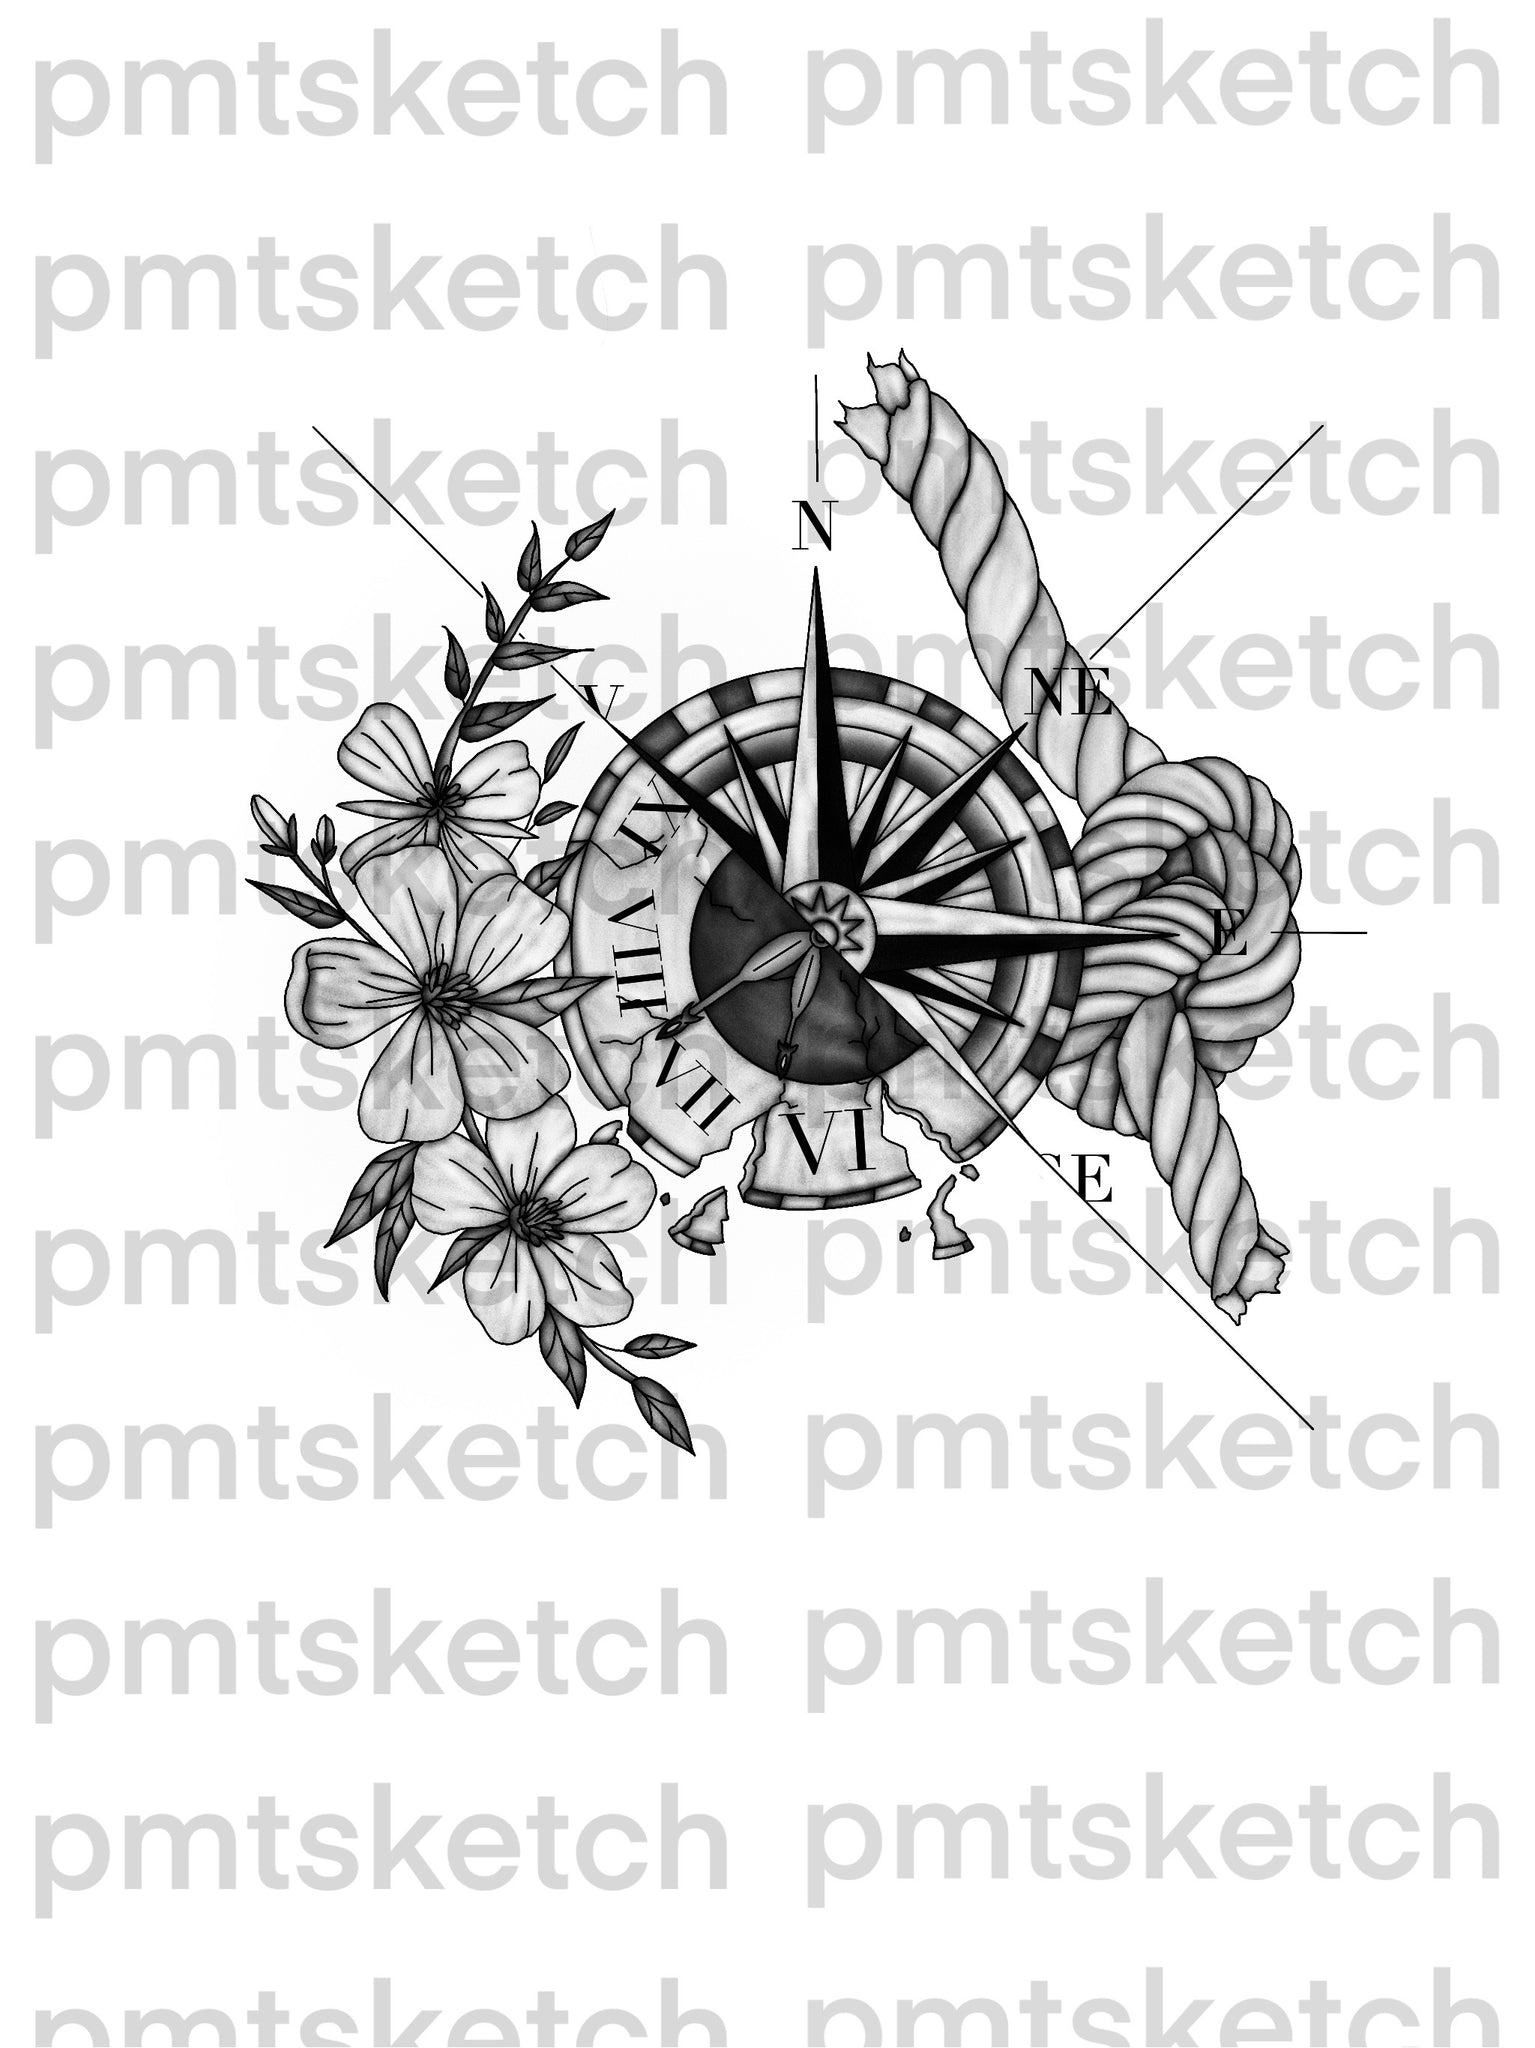 Shaded Compass / Clock / Flowers